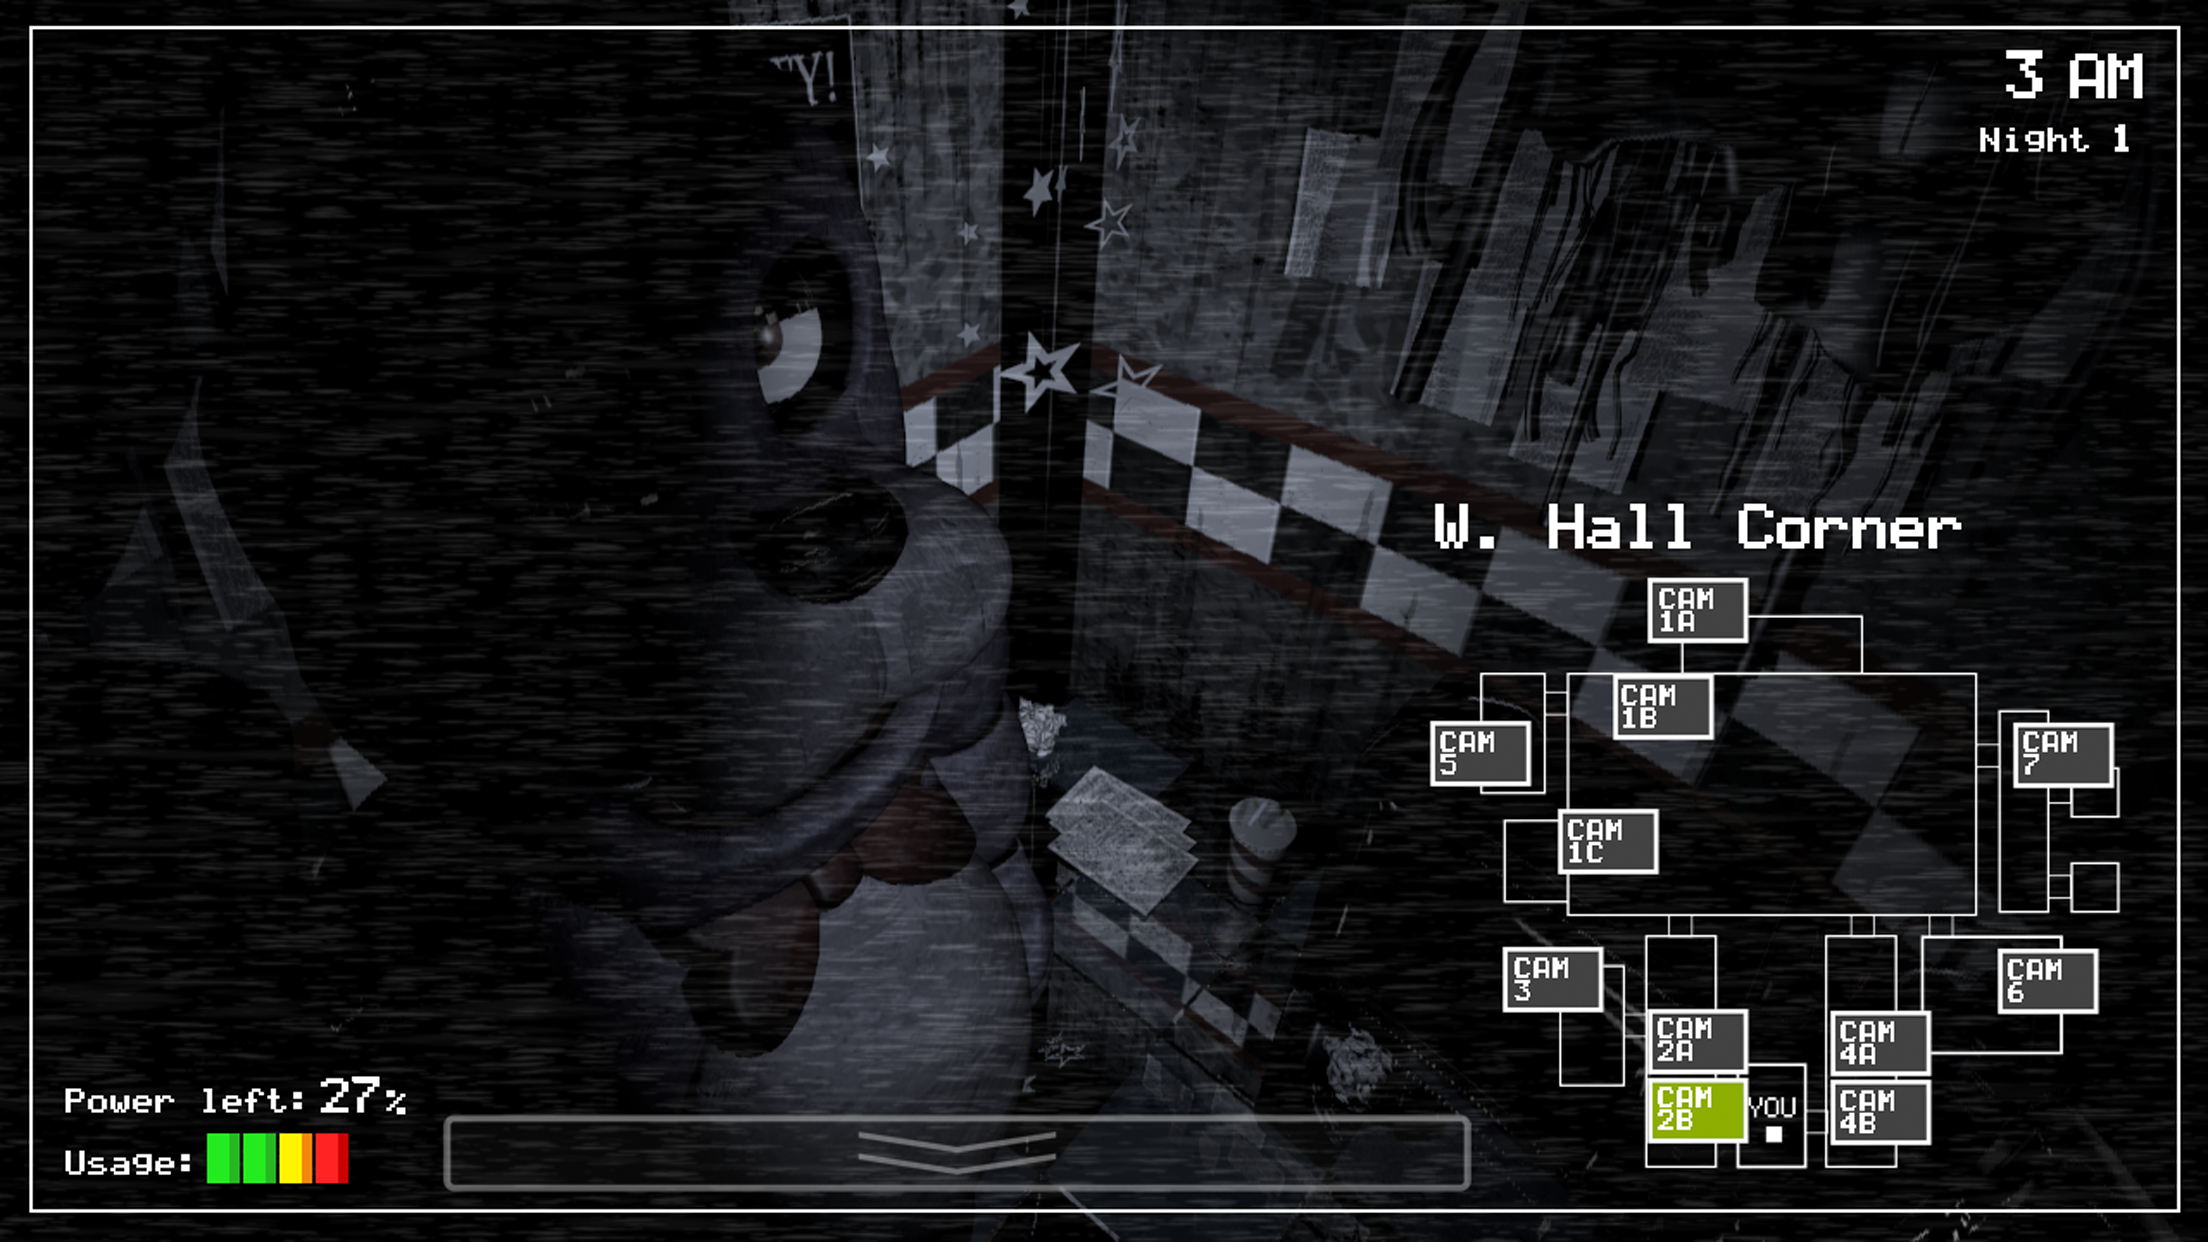 Download Five Nights at Freddy's on PC with MEmu